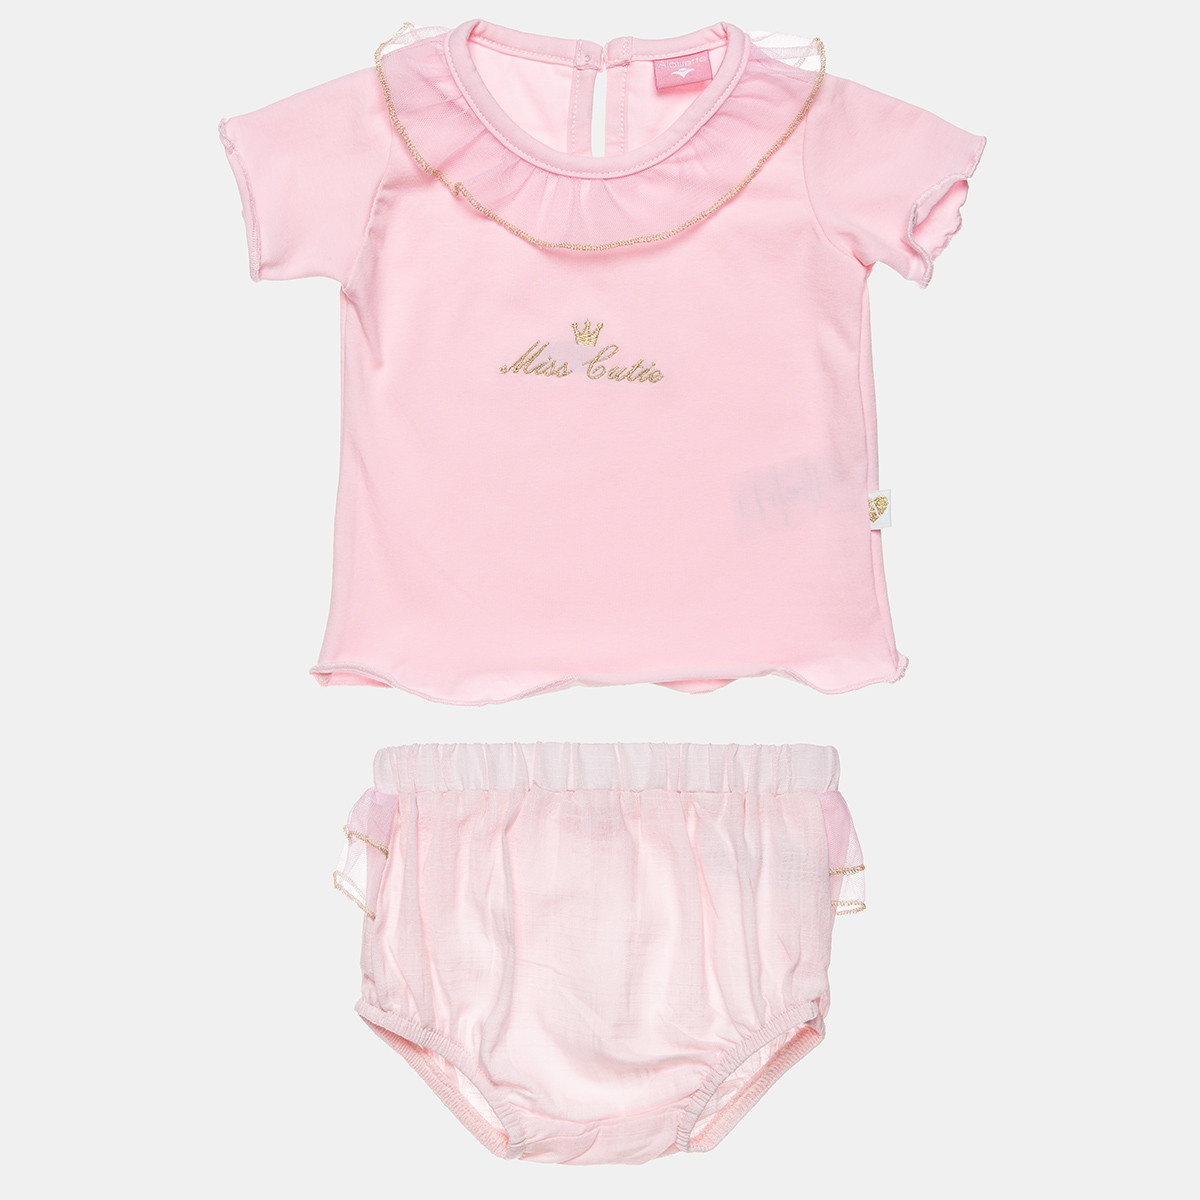 https://www.alouette.gr/653842/set-top-and-underwear-shorts-with-tulle-details-3-18-months.jpg